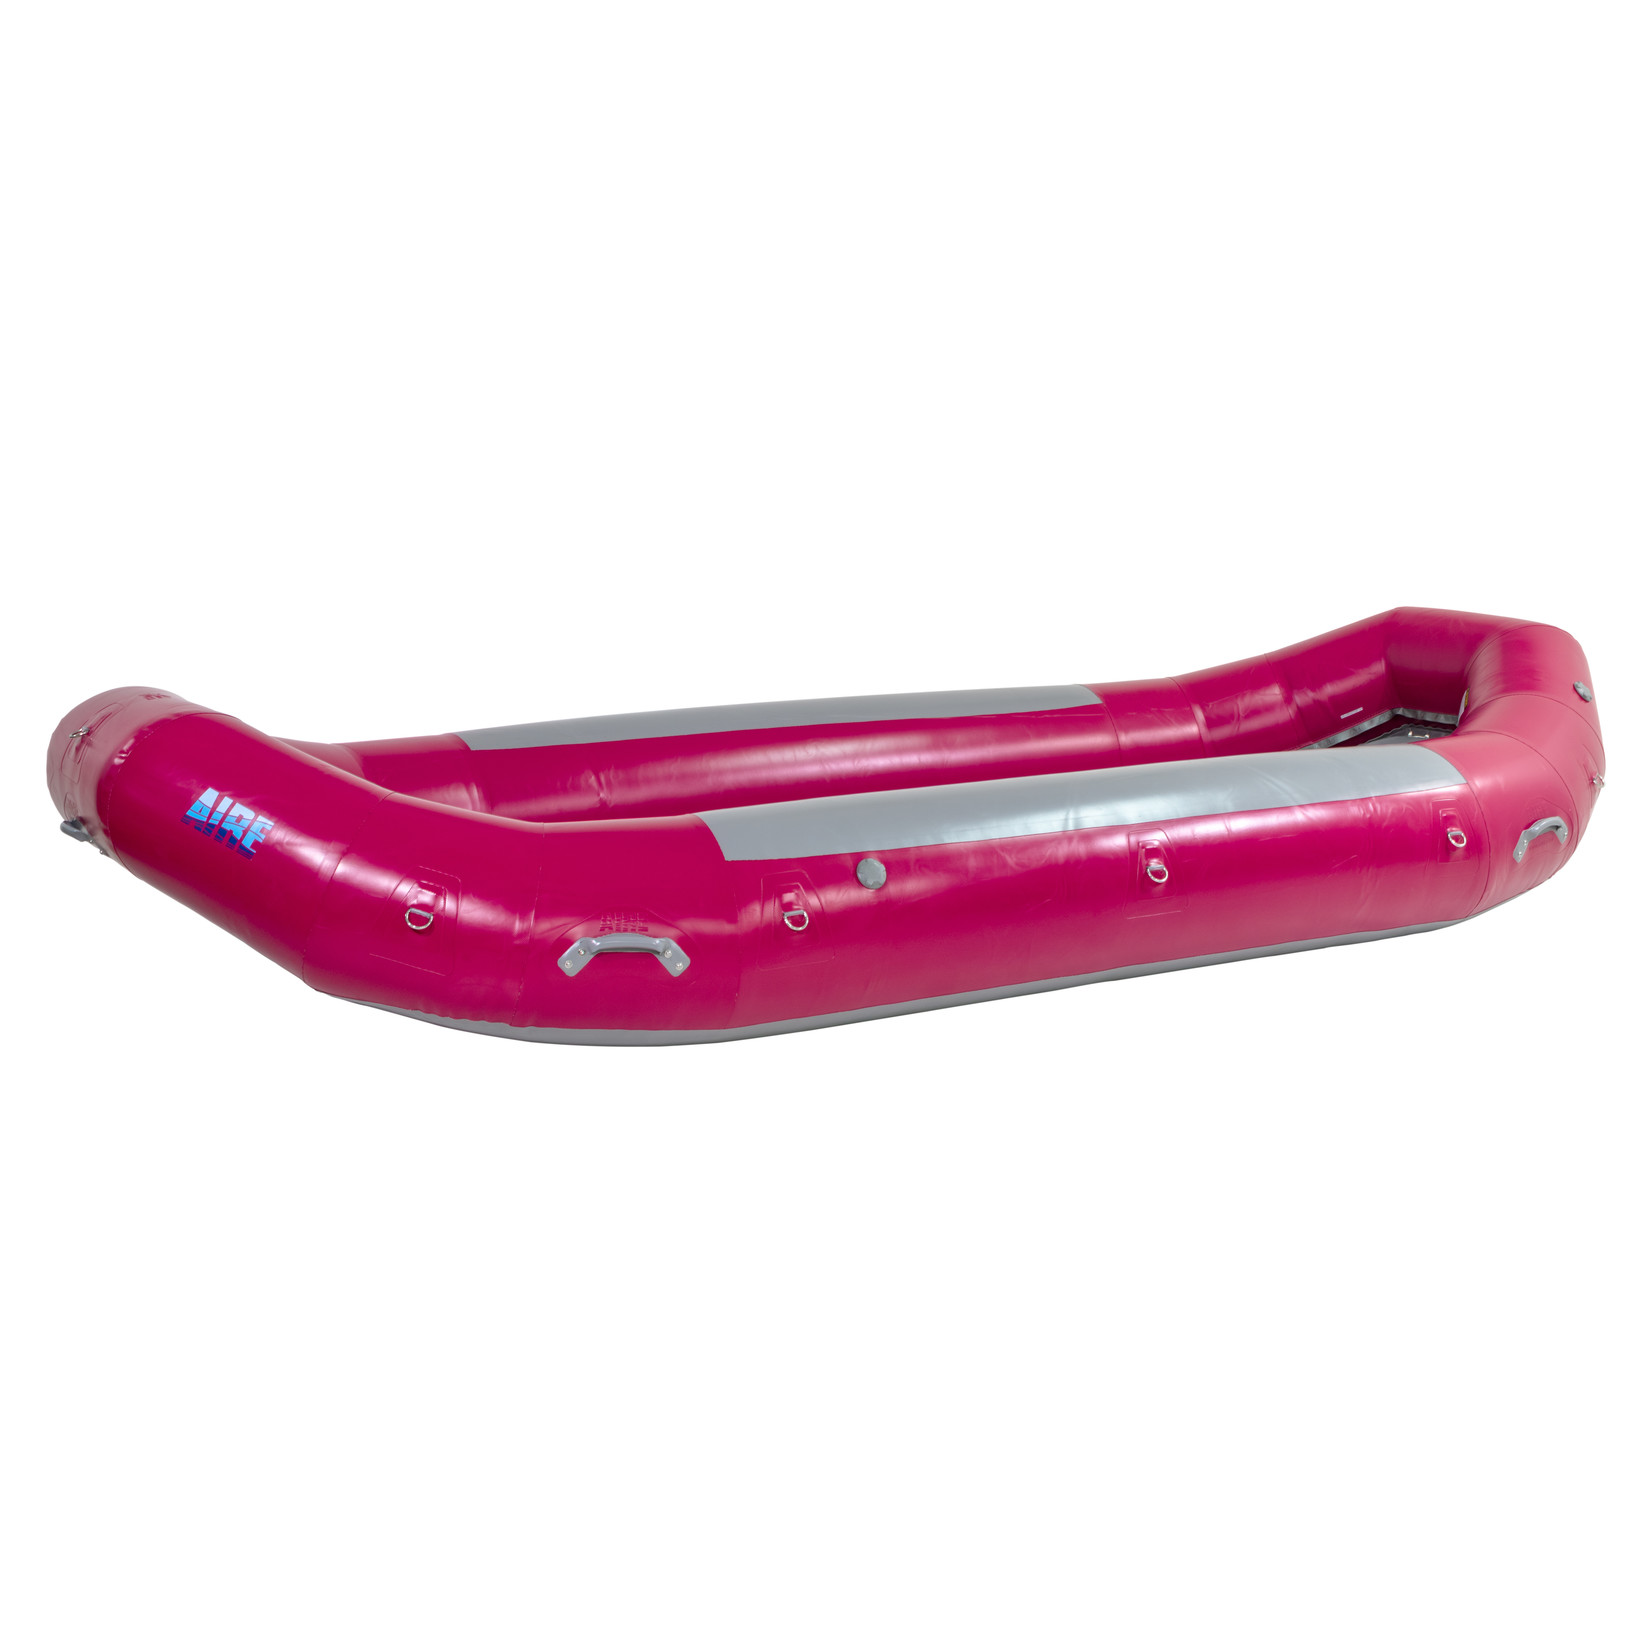 AIRE AIRE 146DD  Self-Bailing Raft